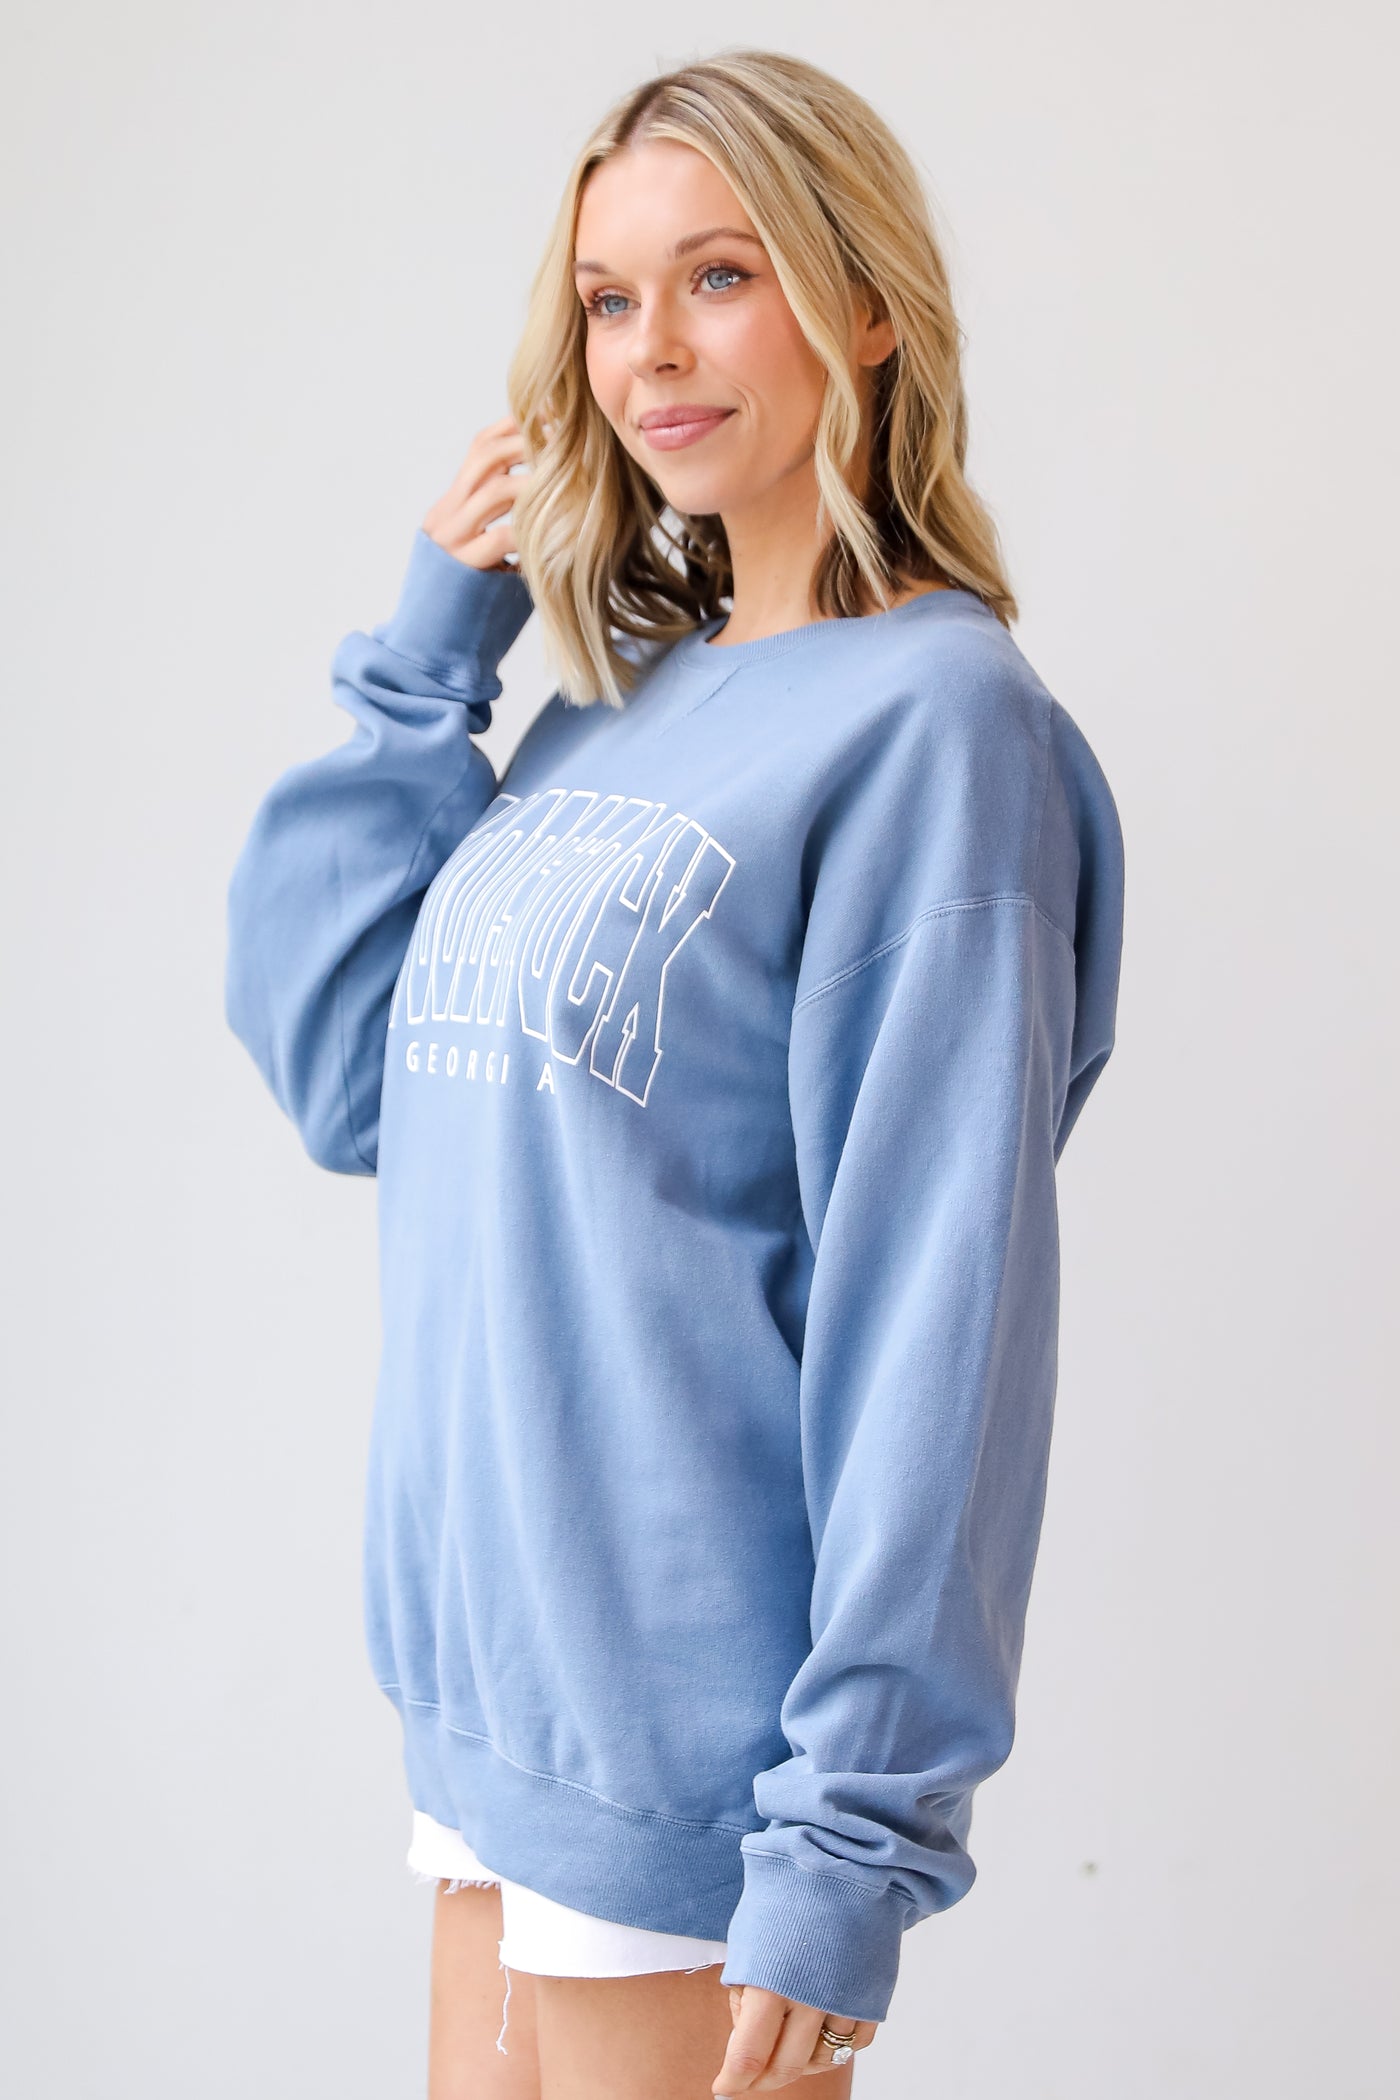 Blue Woodstock Georgia Pullover side view